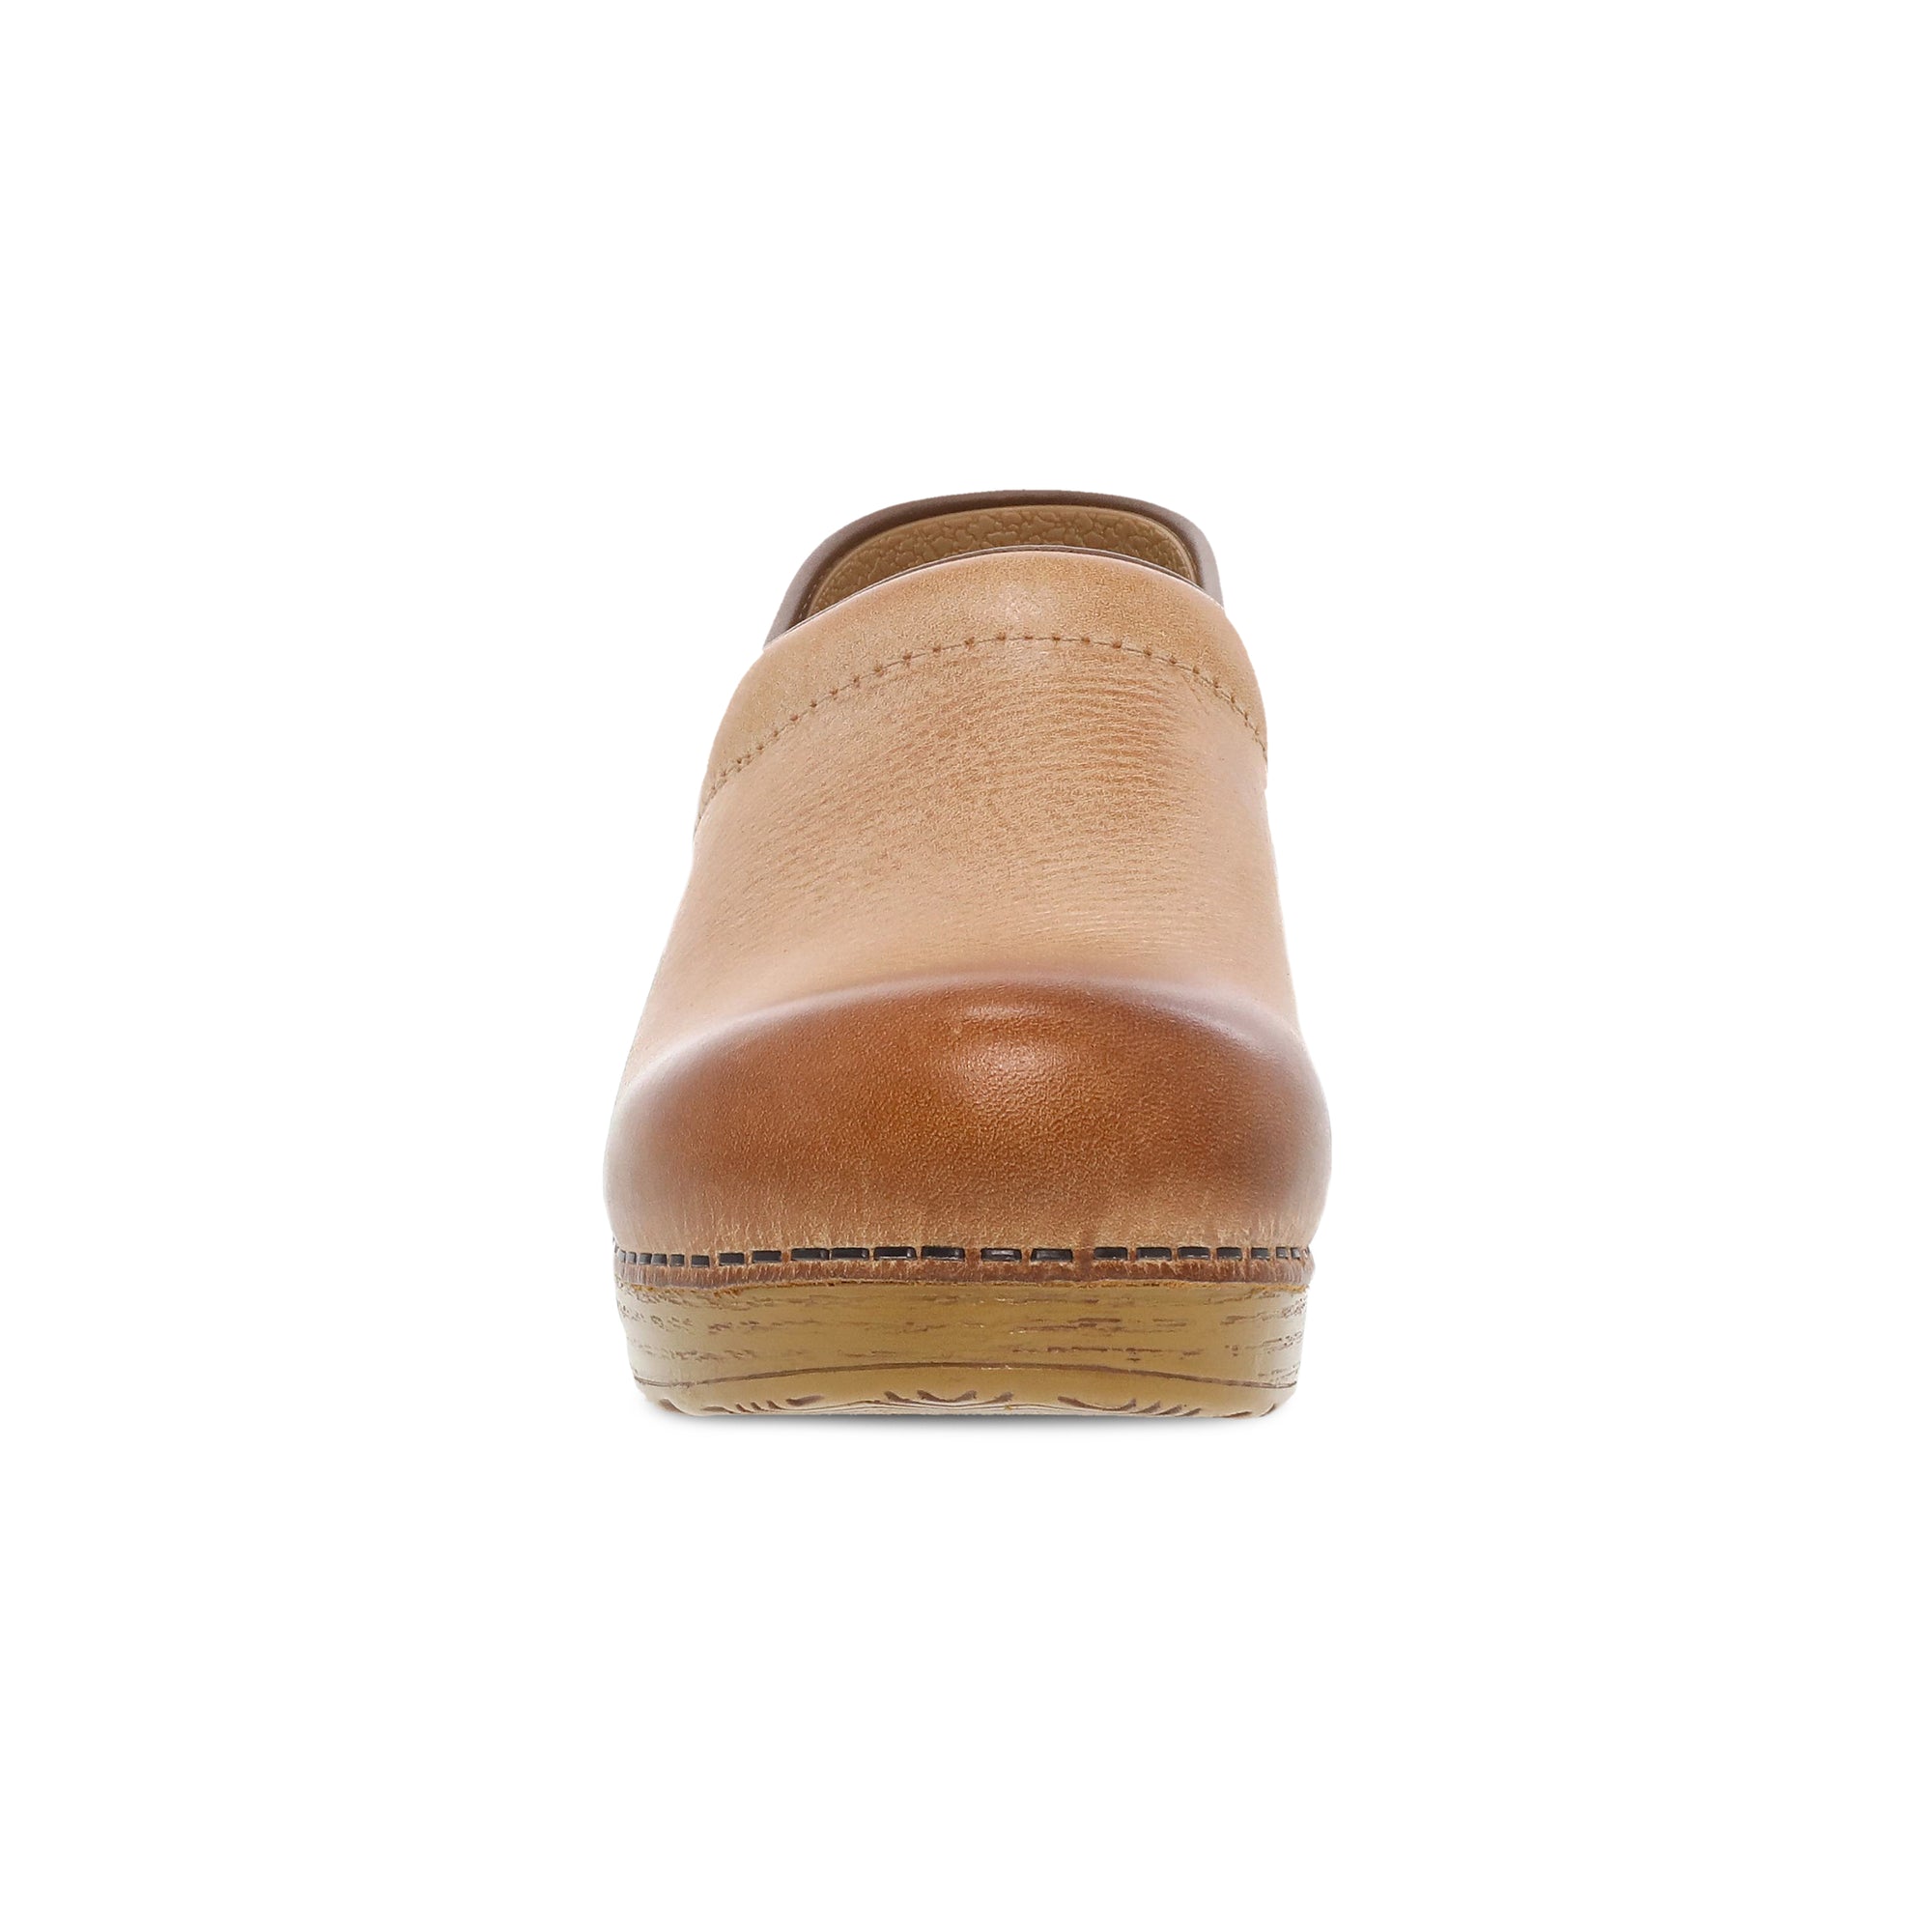 Toe image of Wide Pro Honey Distressed